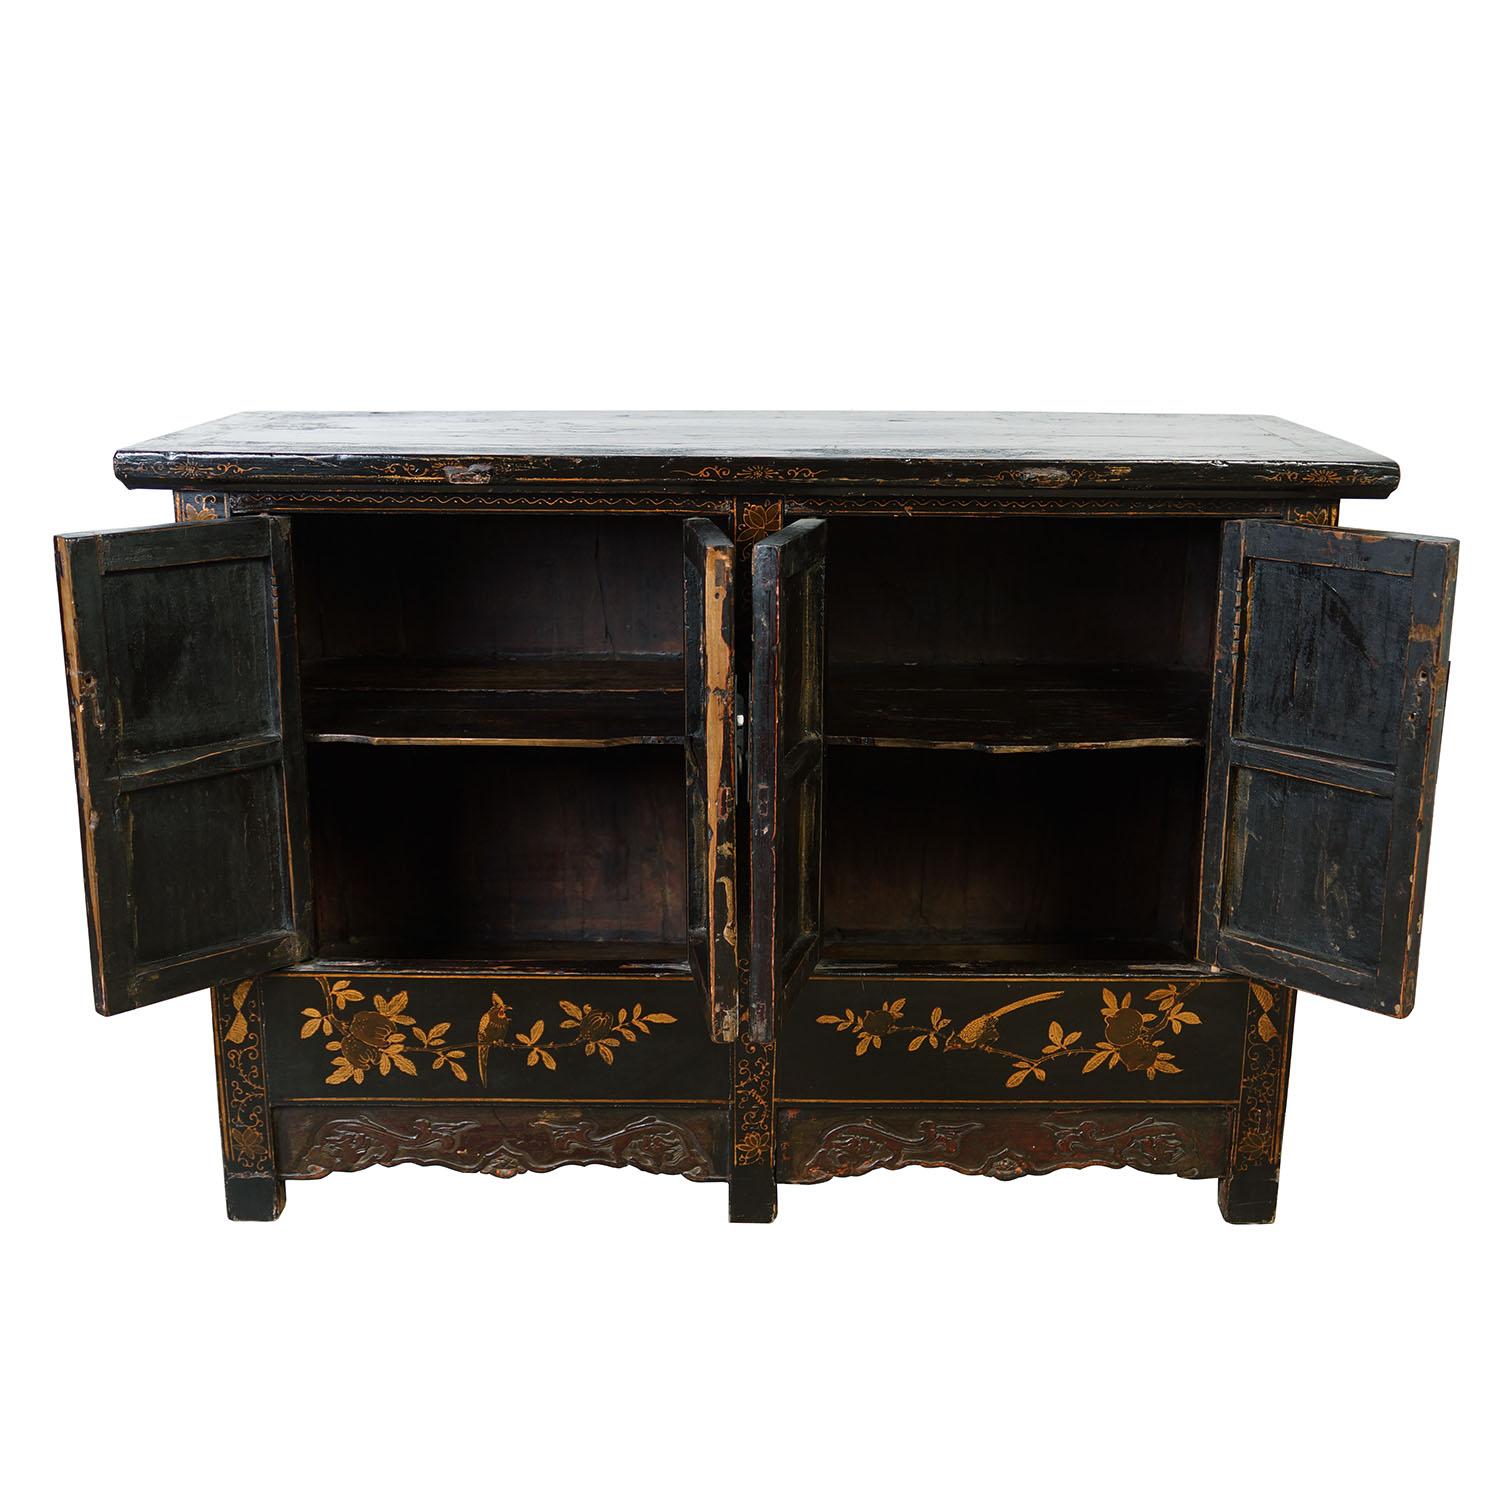 Chinese Export 19th Century Antique Chinese Gilt Black Twin Cabinet/Buffet Table, Siderboard For Sale